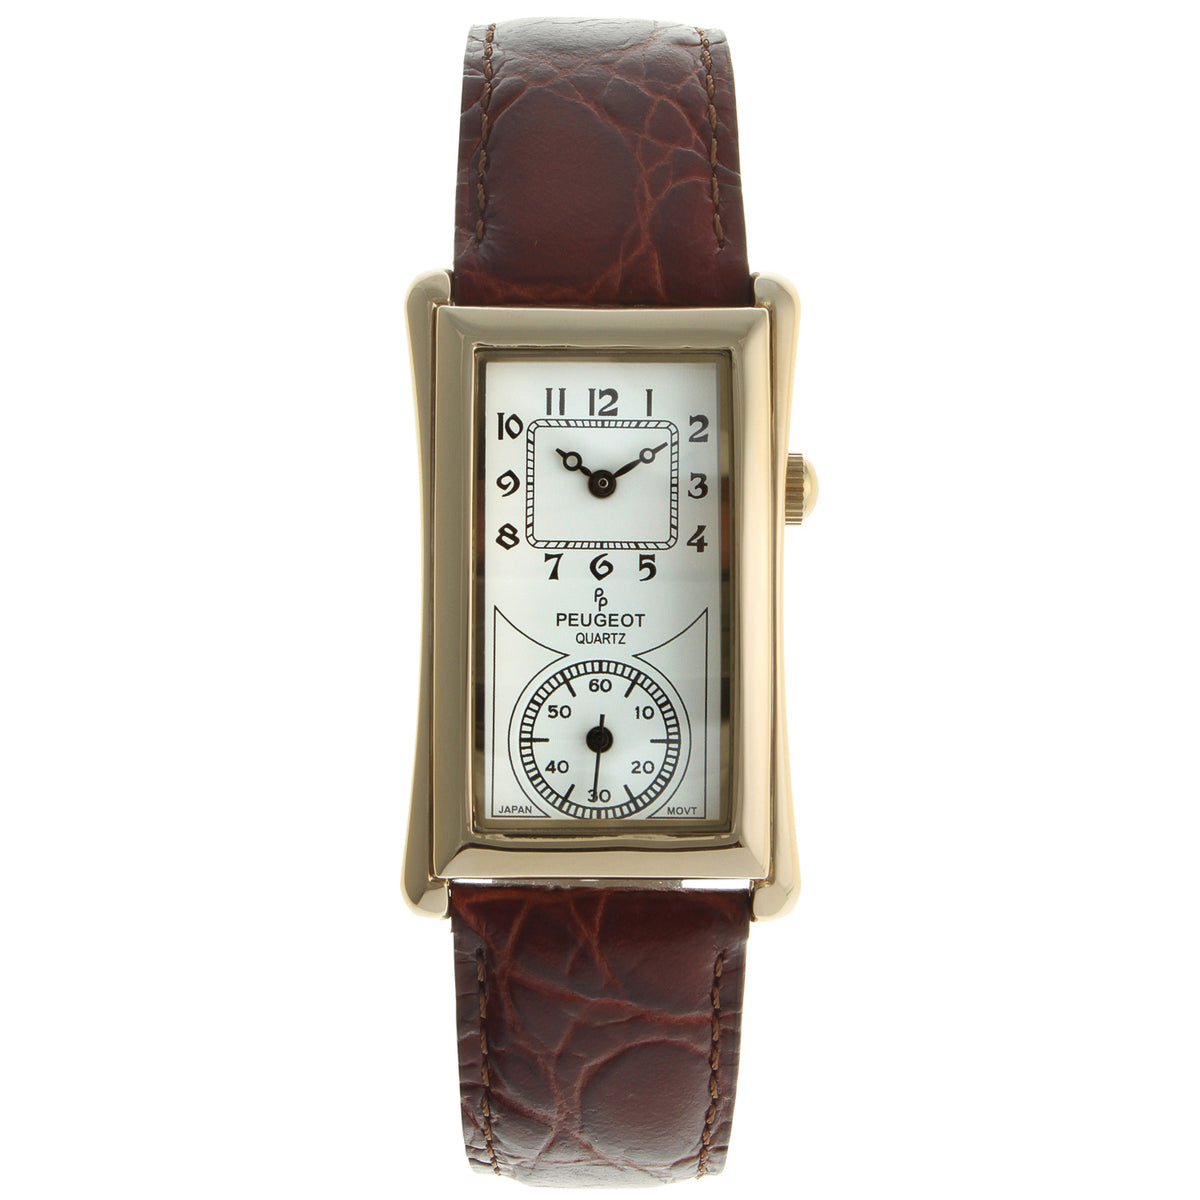 Peugeot Mens Doctors Watch Gold with Brown Leather Strap. - Peugeot Watches